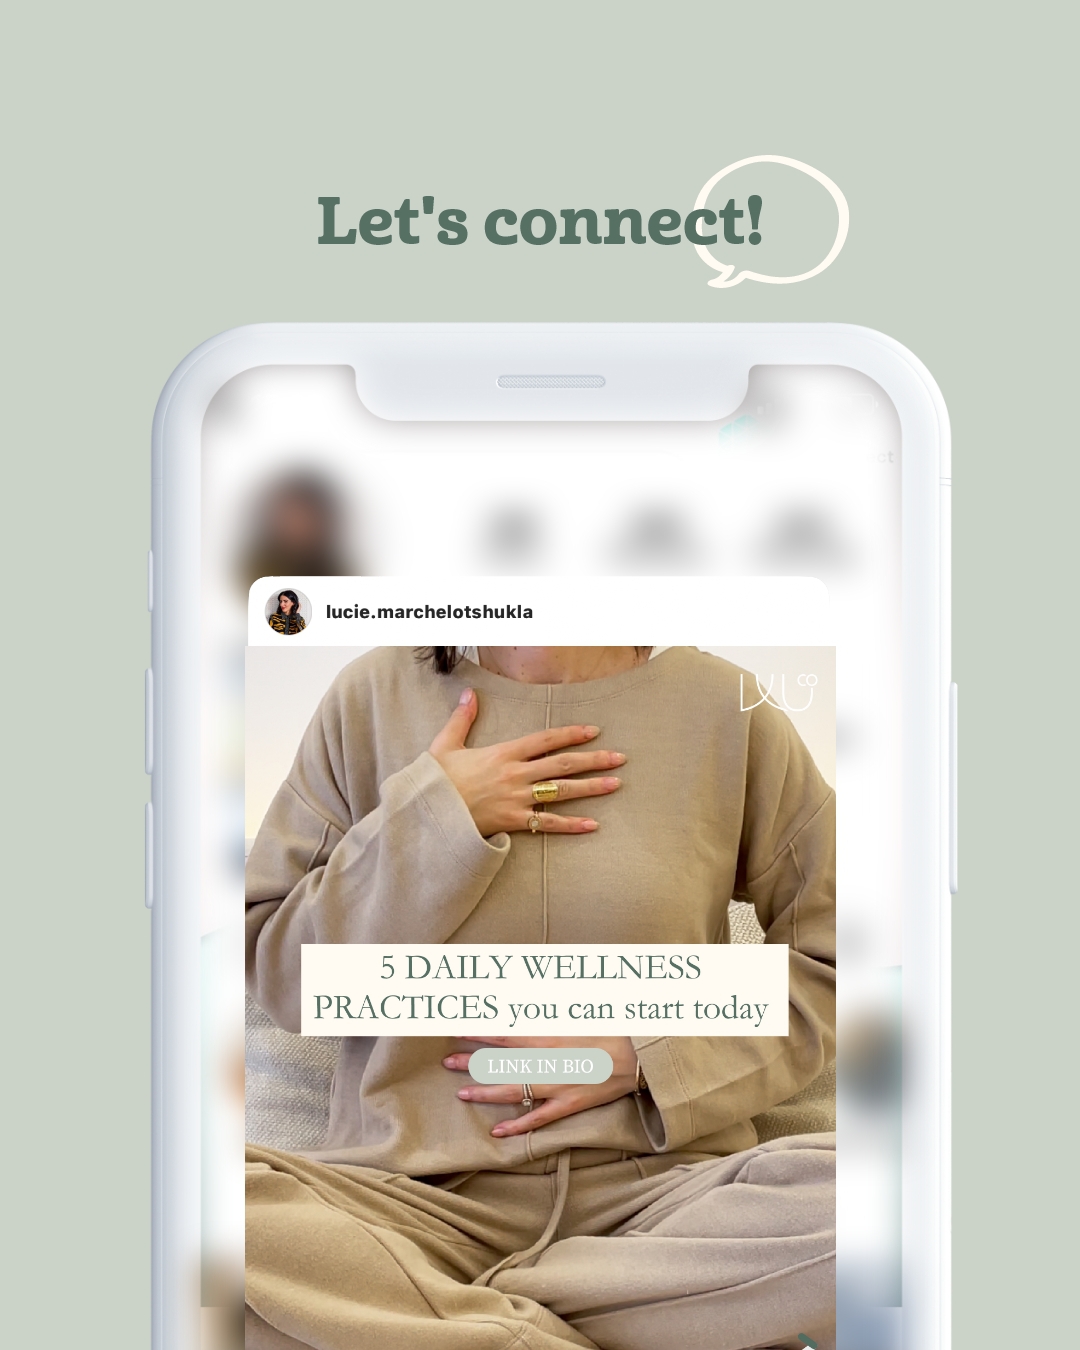 Connect with me on my wellness and health coaching Instagram